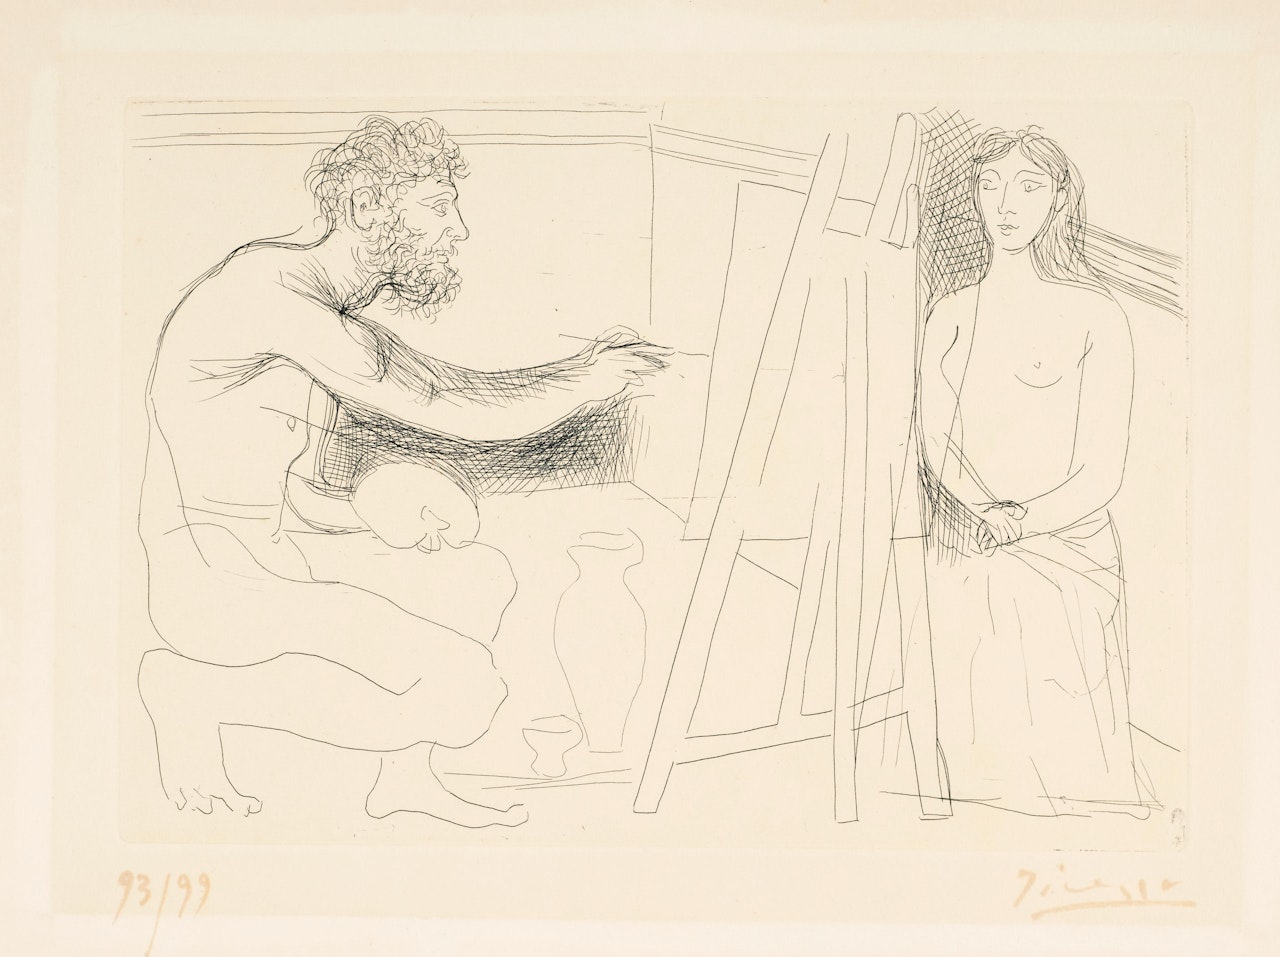 Peintre devant son Chevalet (Painter in front of his Easel), from Le Chef-d'Œuvre Inconnu by Pablo Picasso